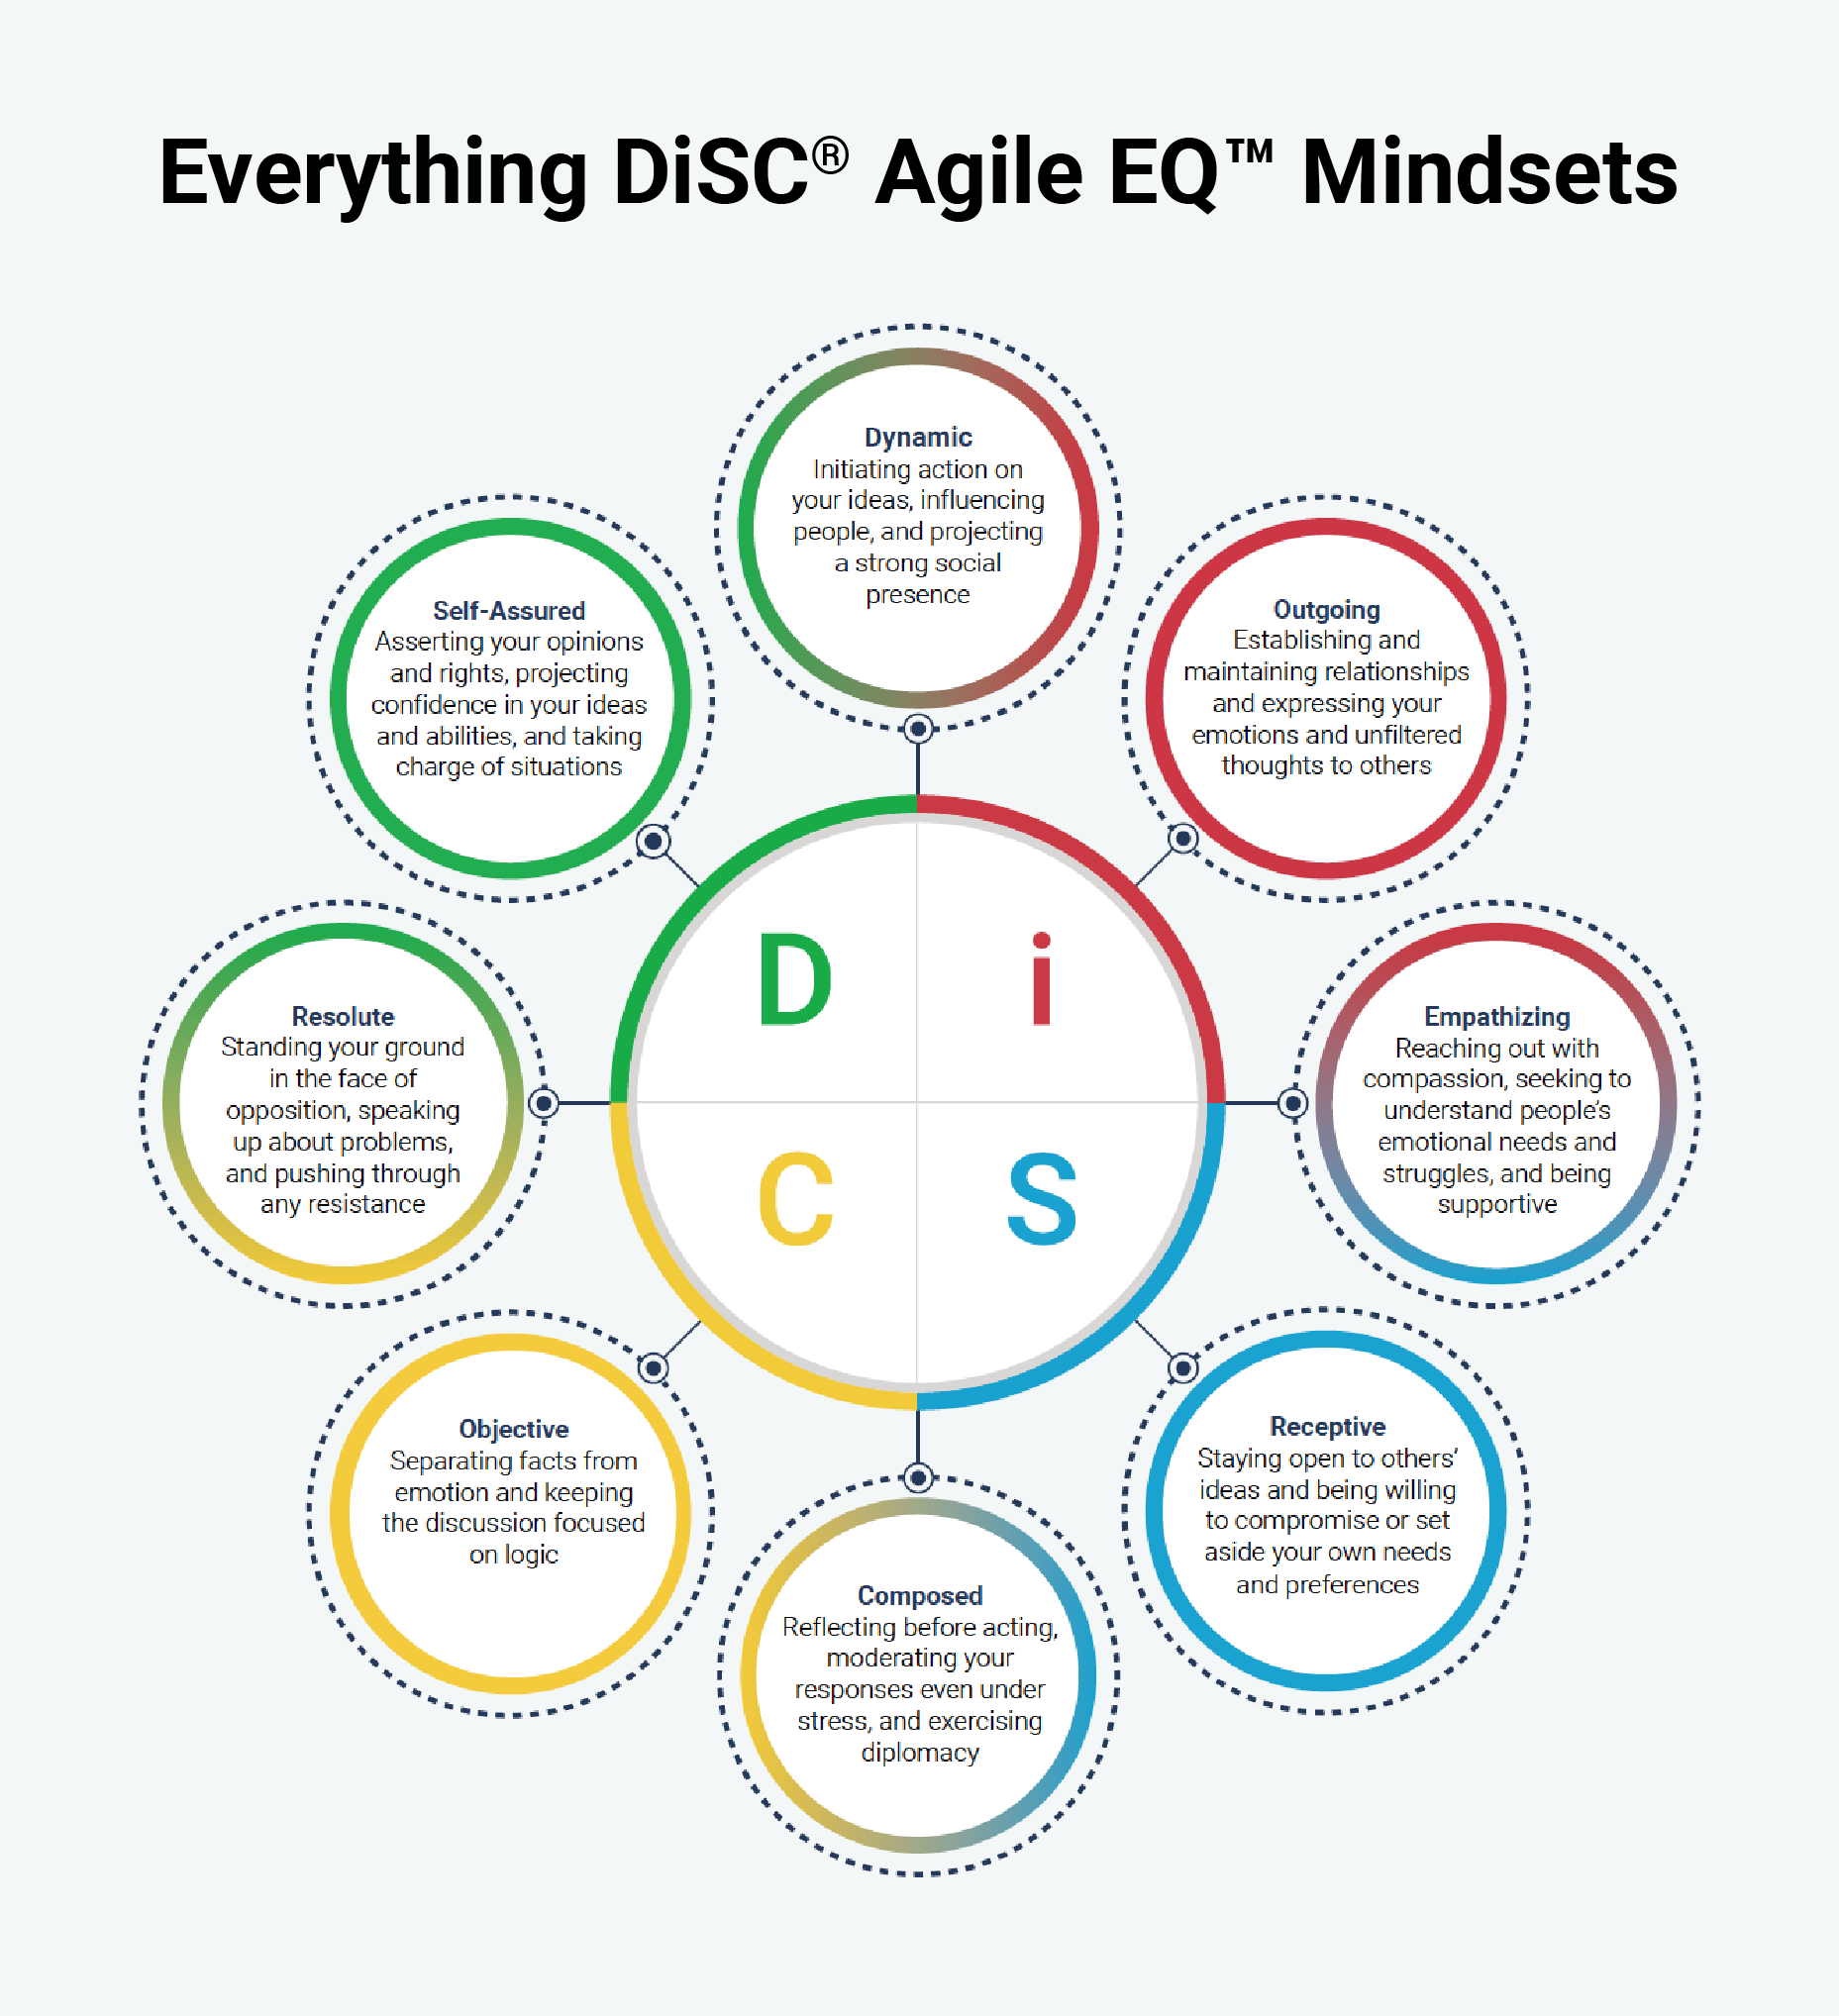 Graphic showing the 8 Agile EQ mindsets